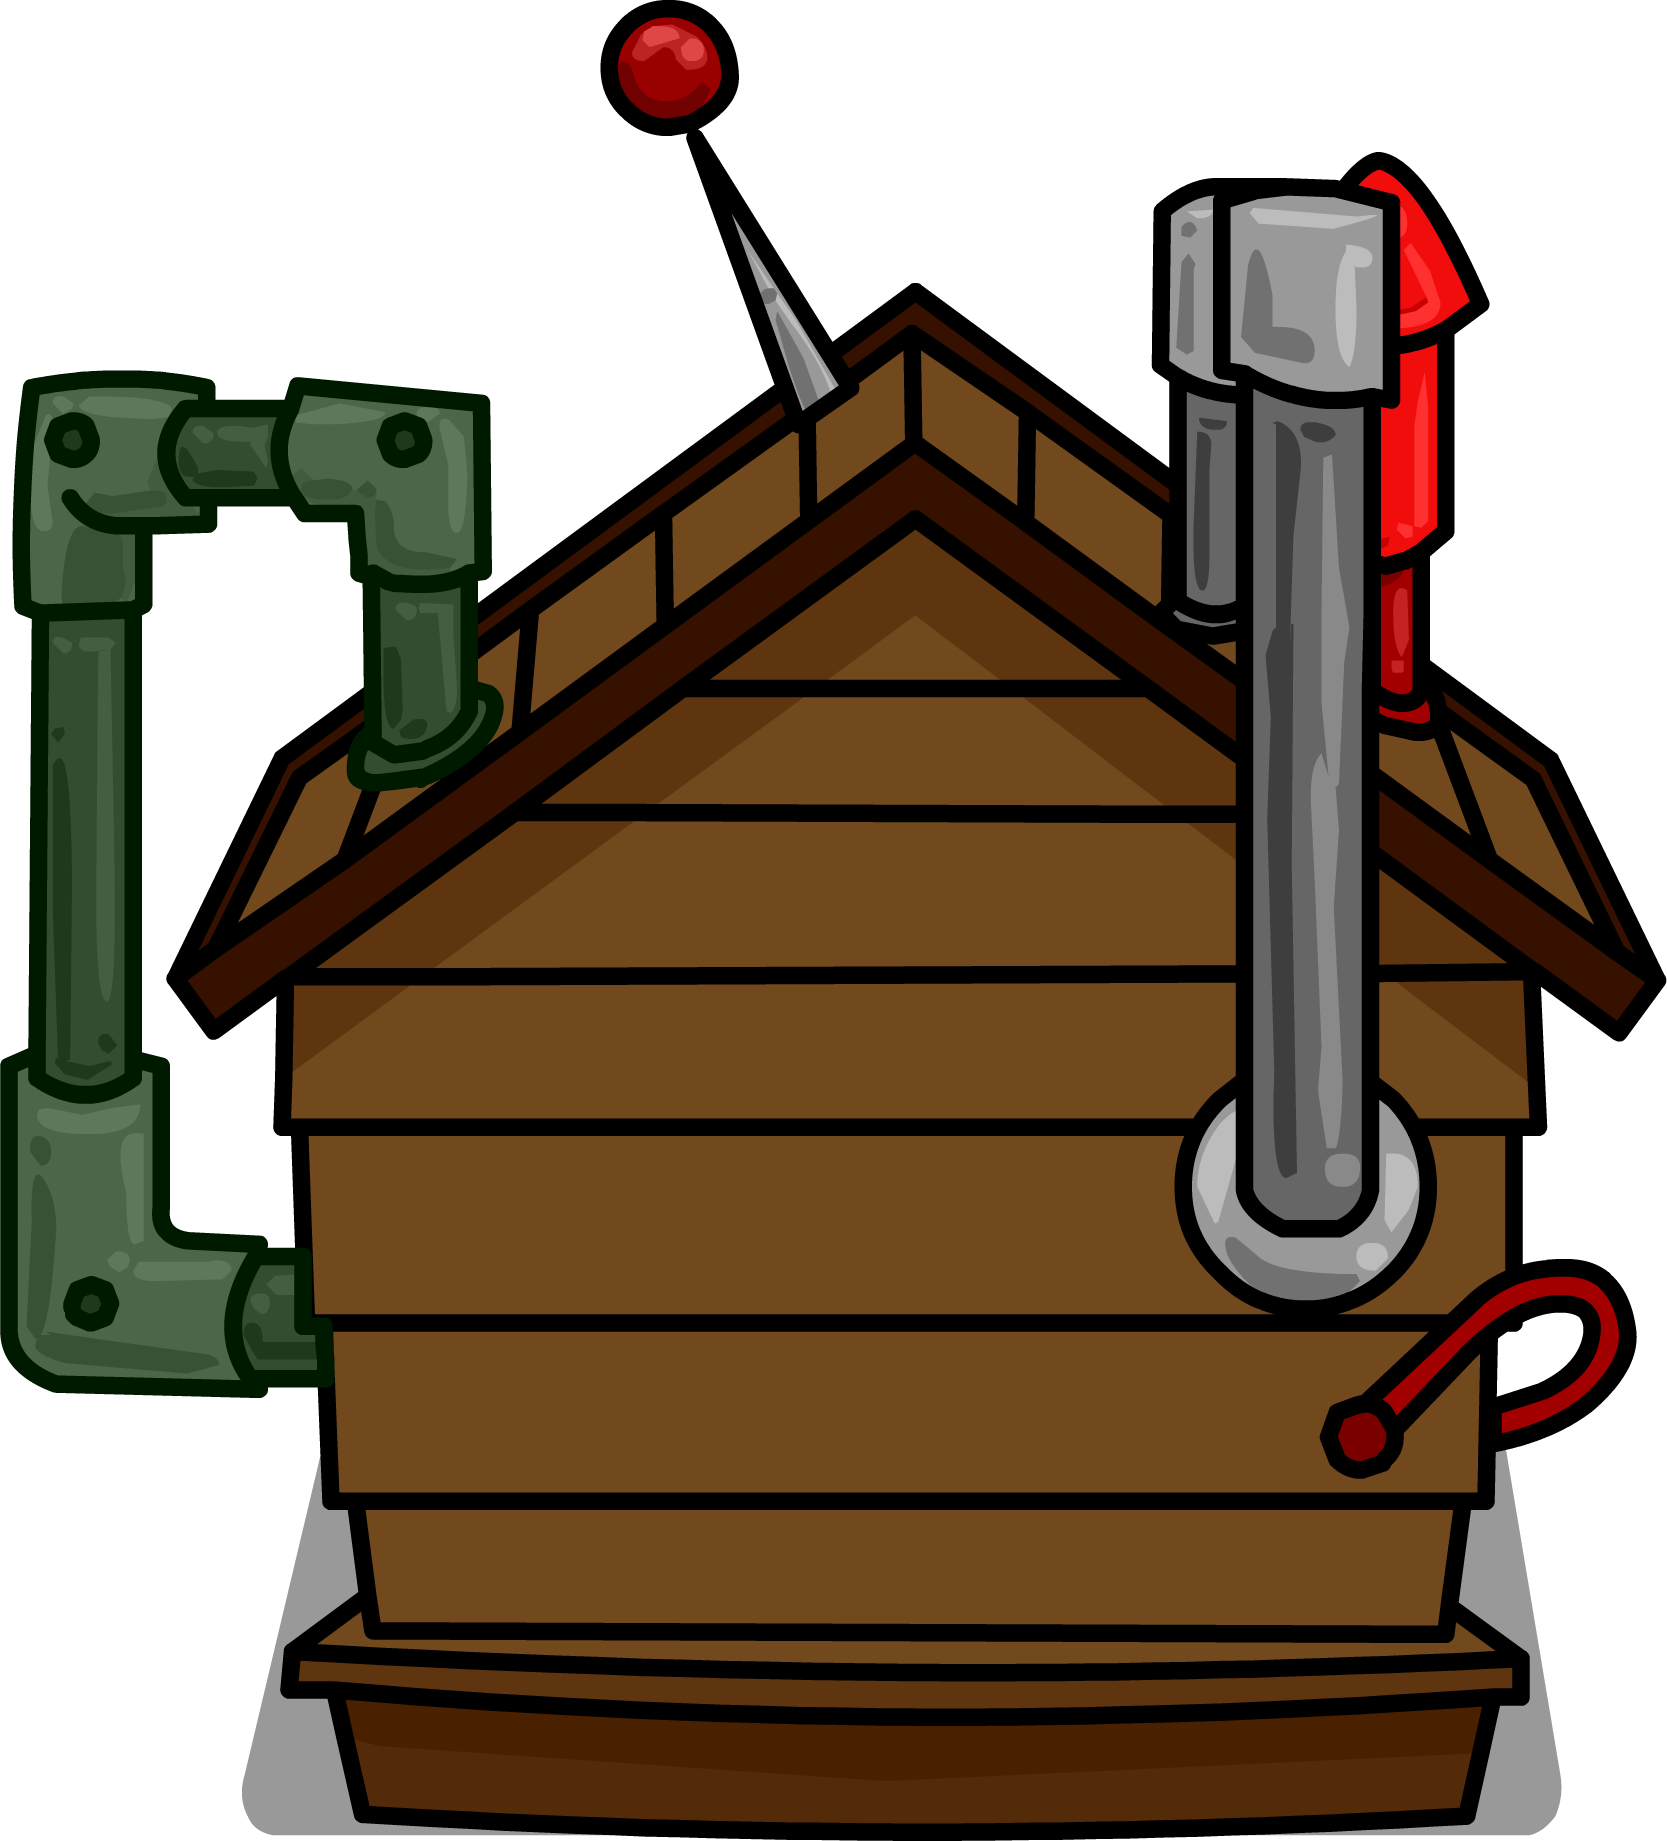 Brown Puffle House Id 665 Sprite 003 - Portable Network Graphics (1667x1841)